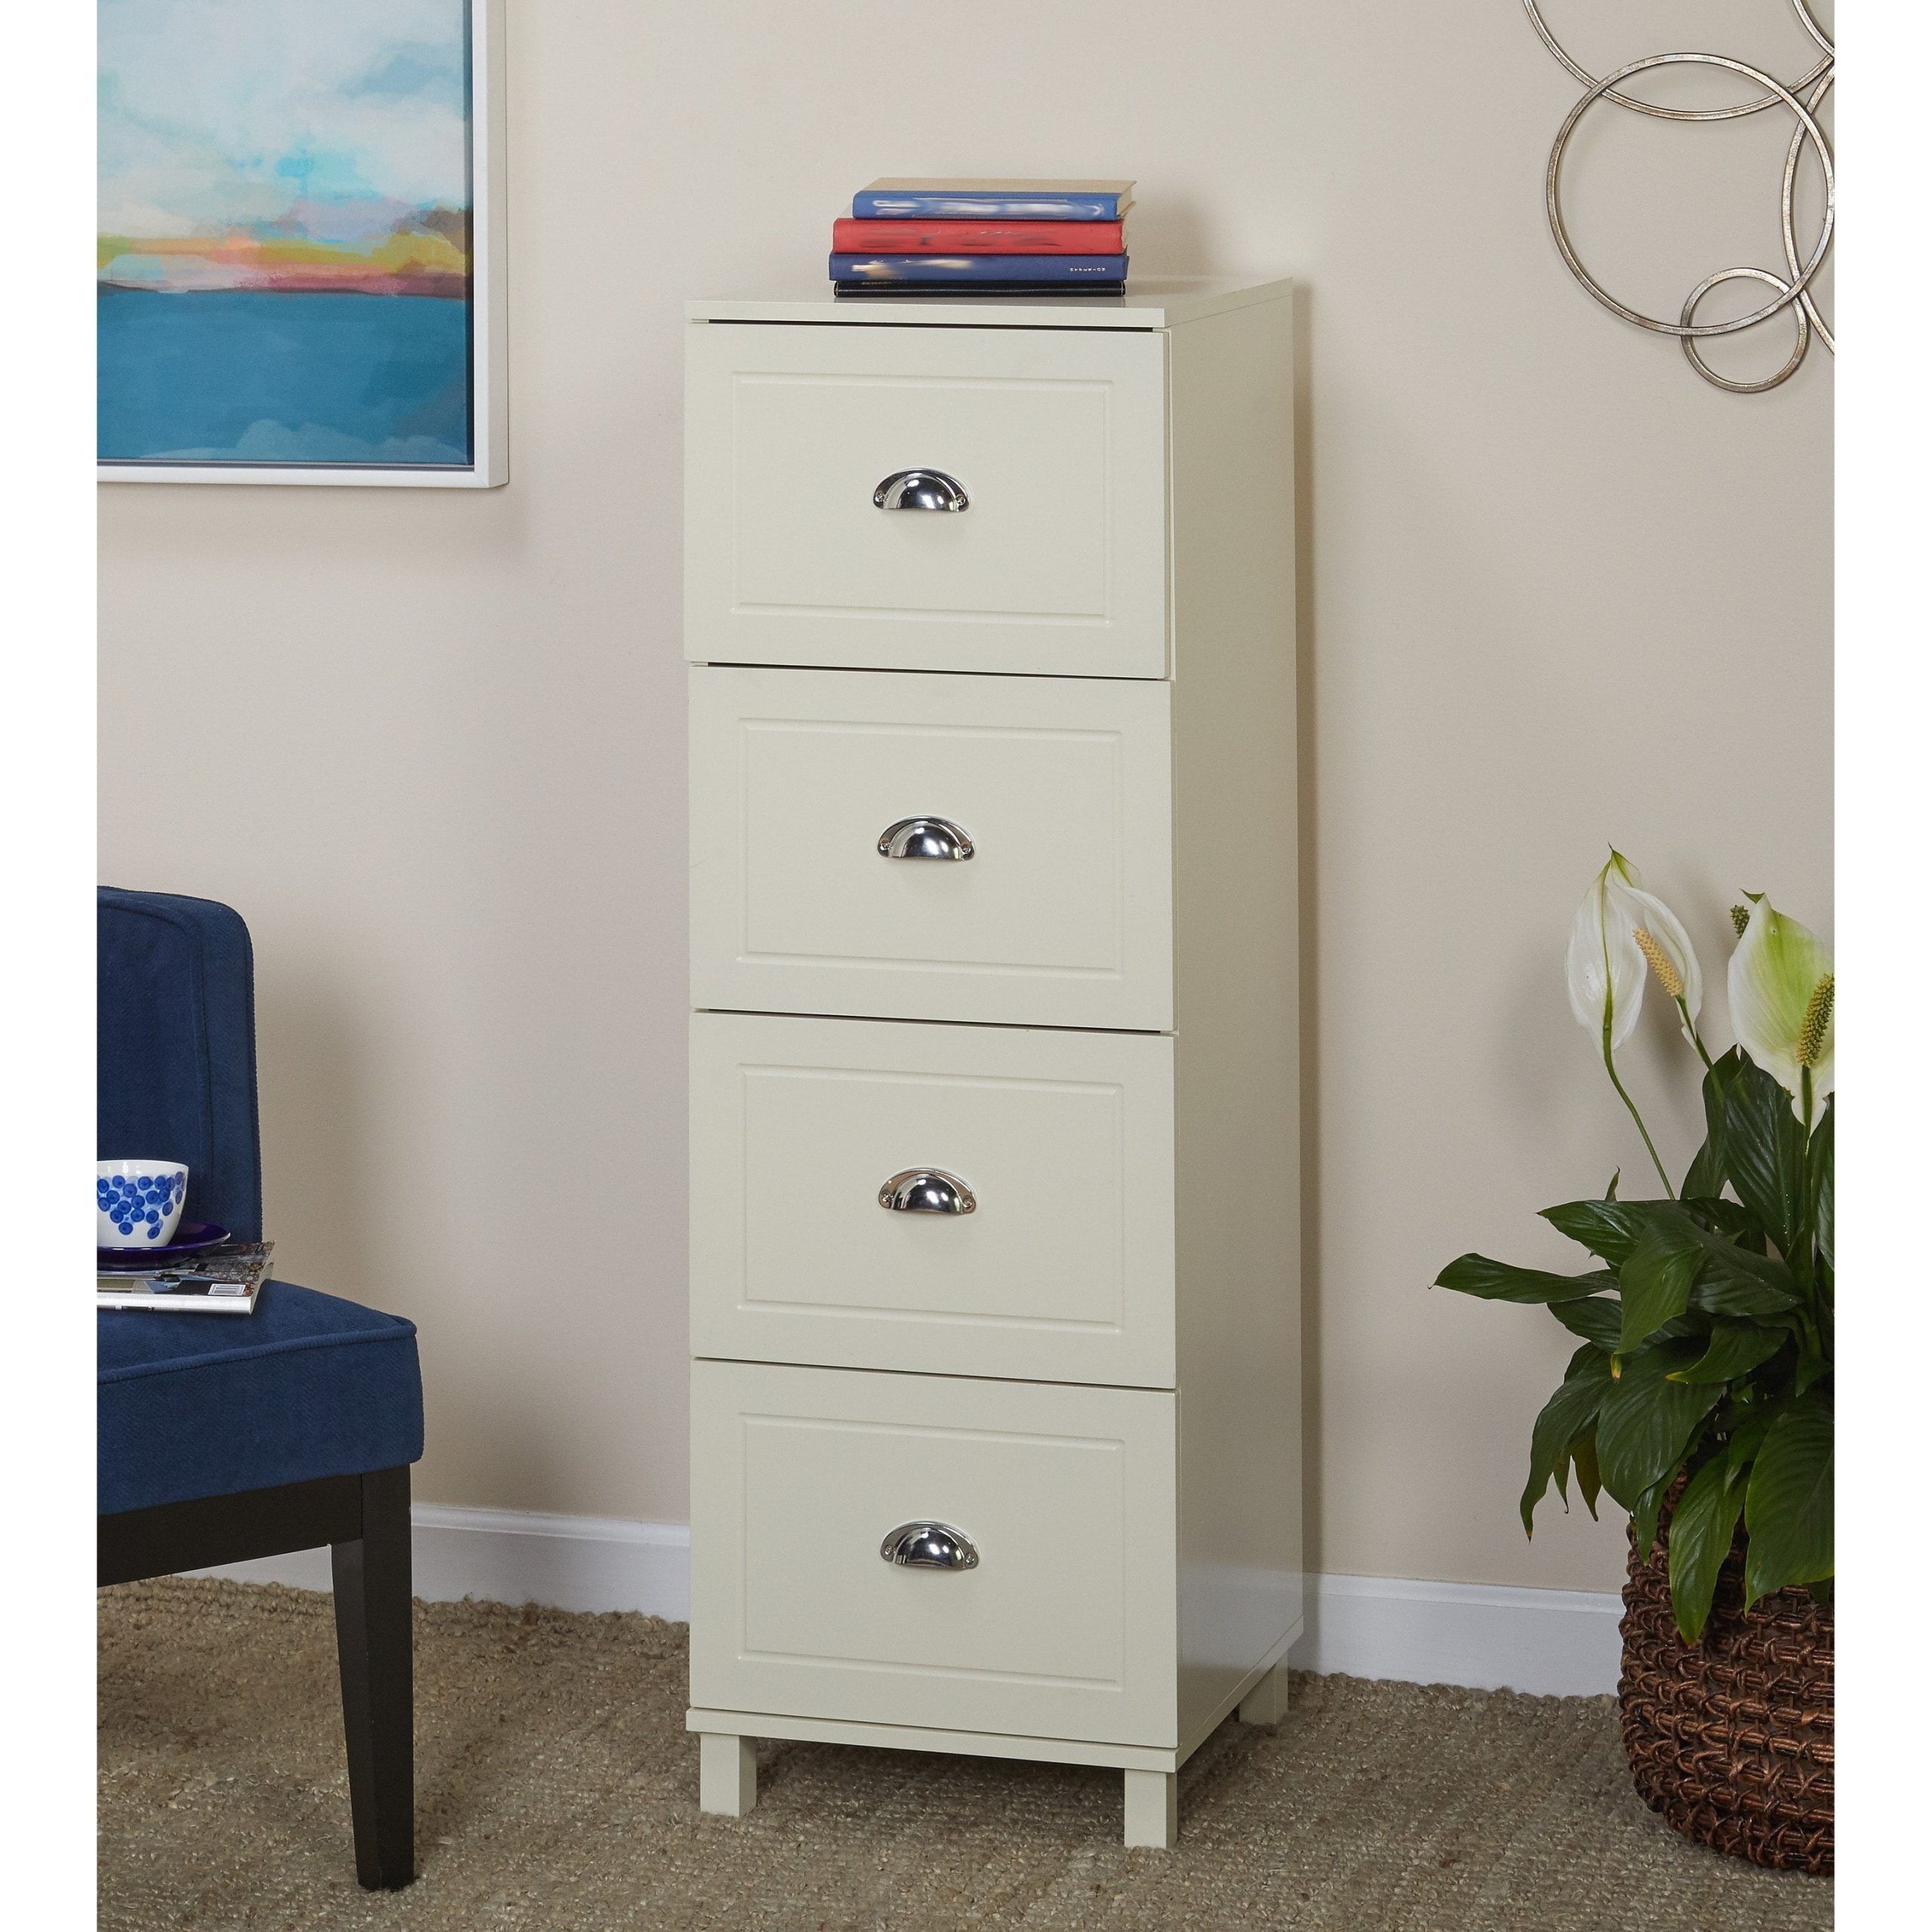 Bradley 4 Drawer Vertical Wood Filing Cabinet, White – Walmart Within Wood Cabinet With Drawers (View 4 of 20)